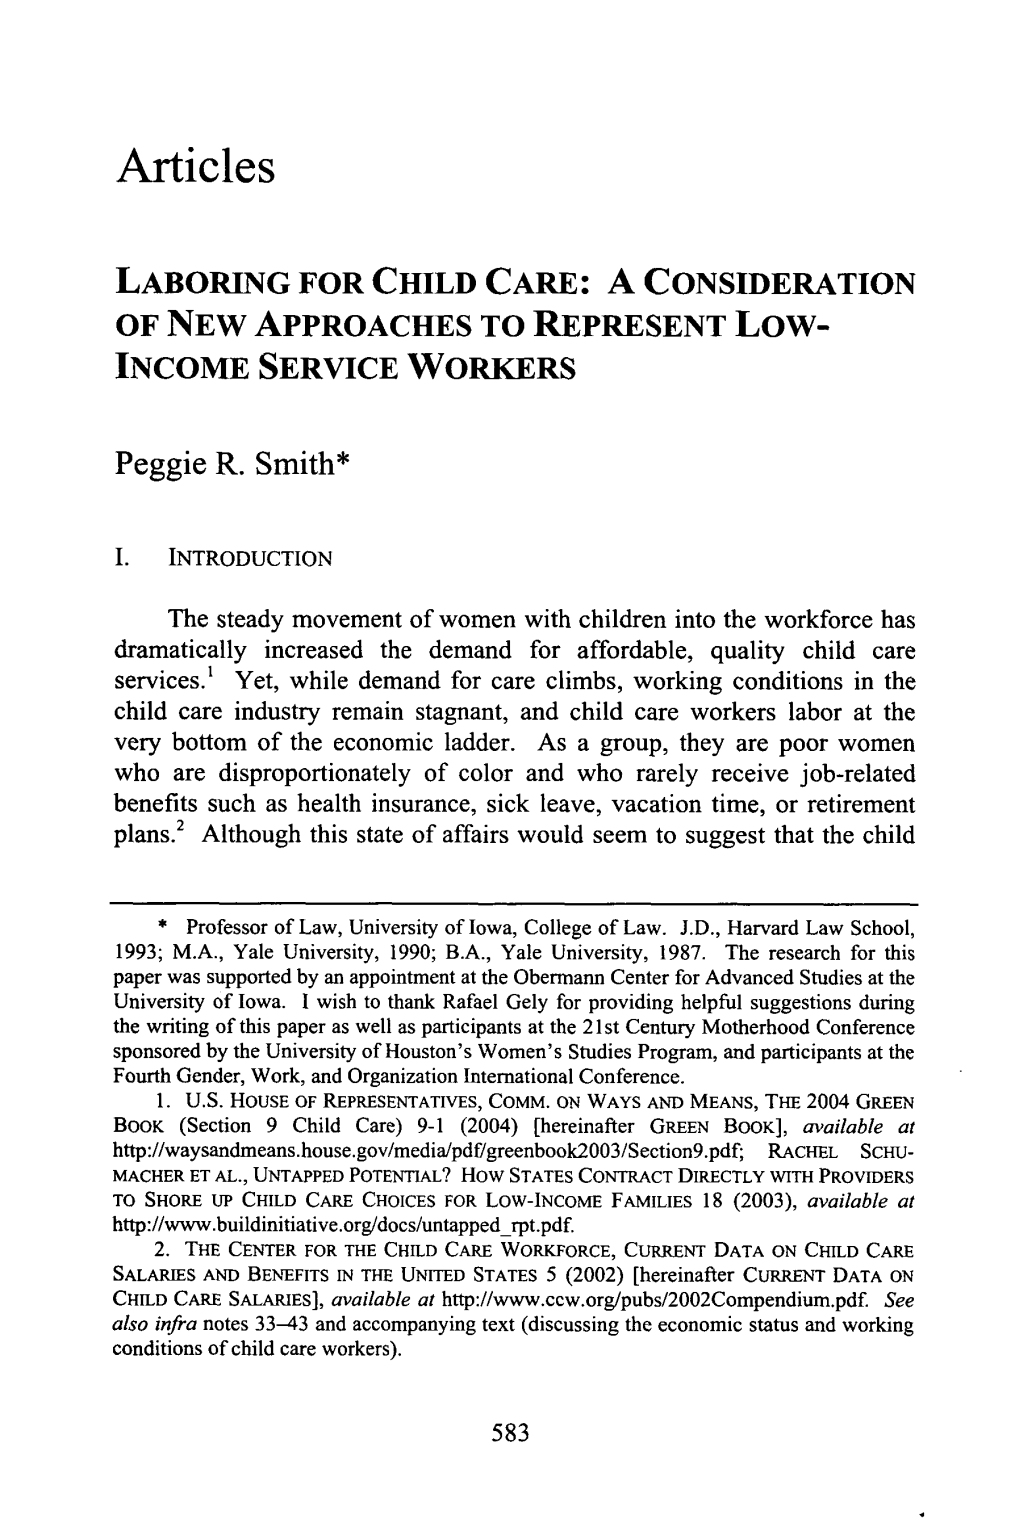 LABORING for CHILD CARE: a CONSIDERATION of NEW APPROACHES to REPRESENT Low- INCOME SERVICE WORKERS